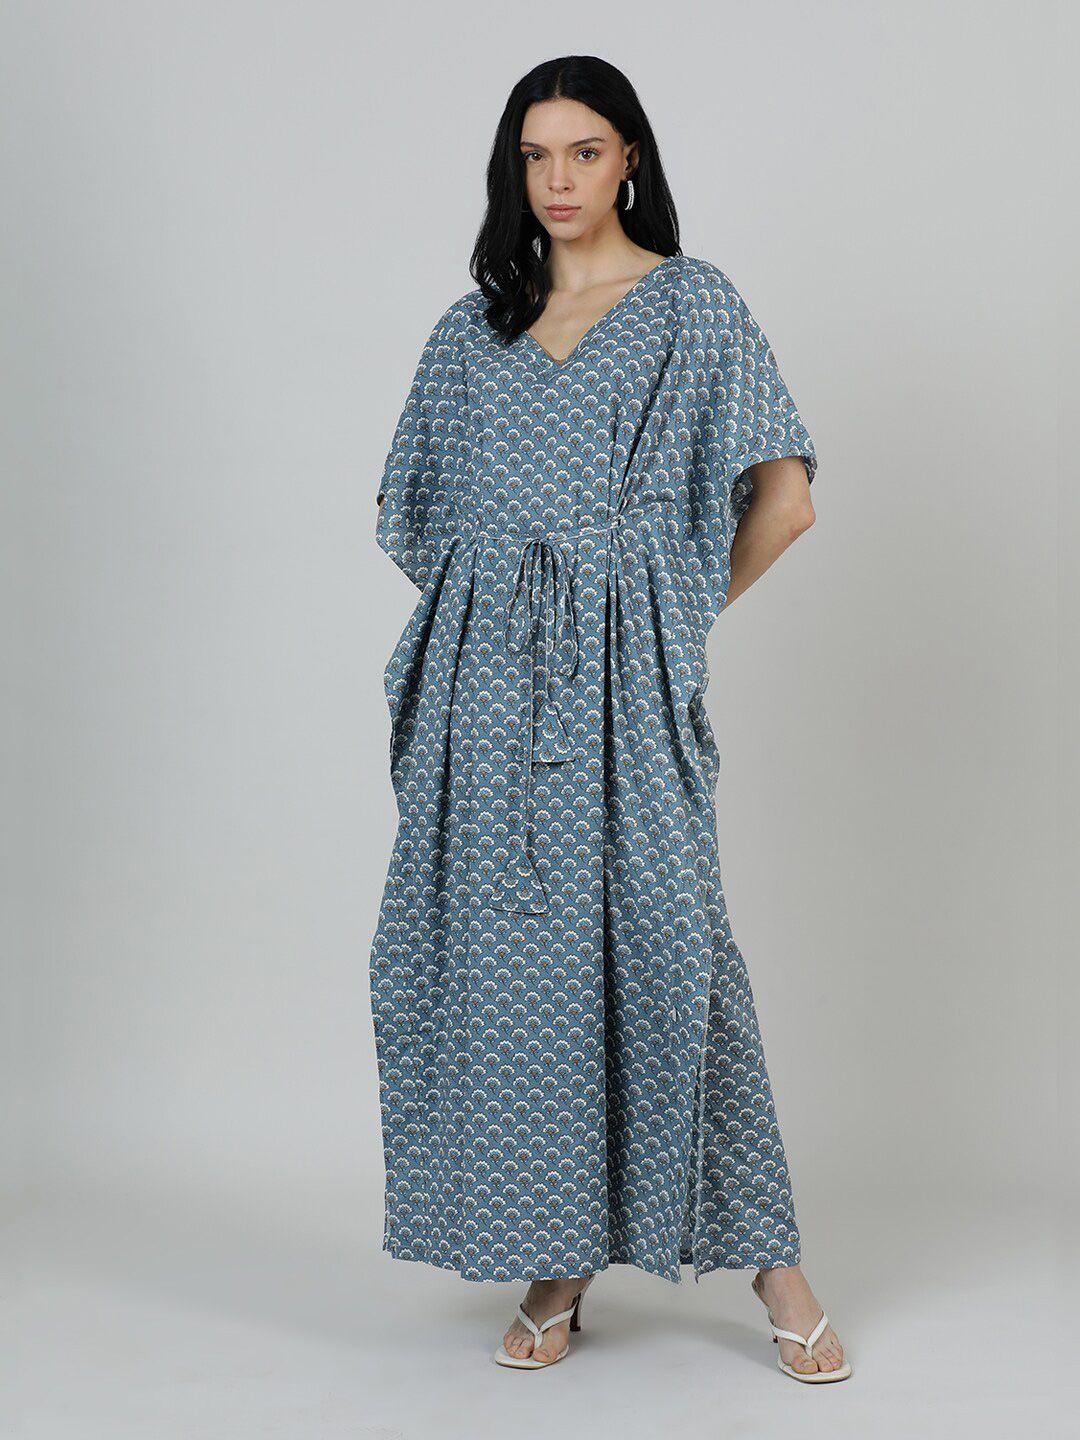 mackly Floral Printed Flared Sleeve Maxi Dress